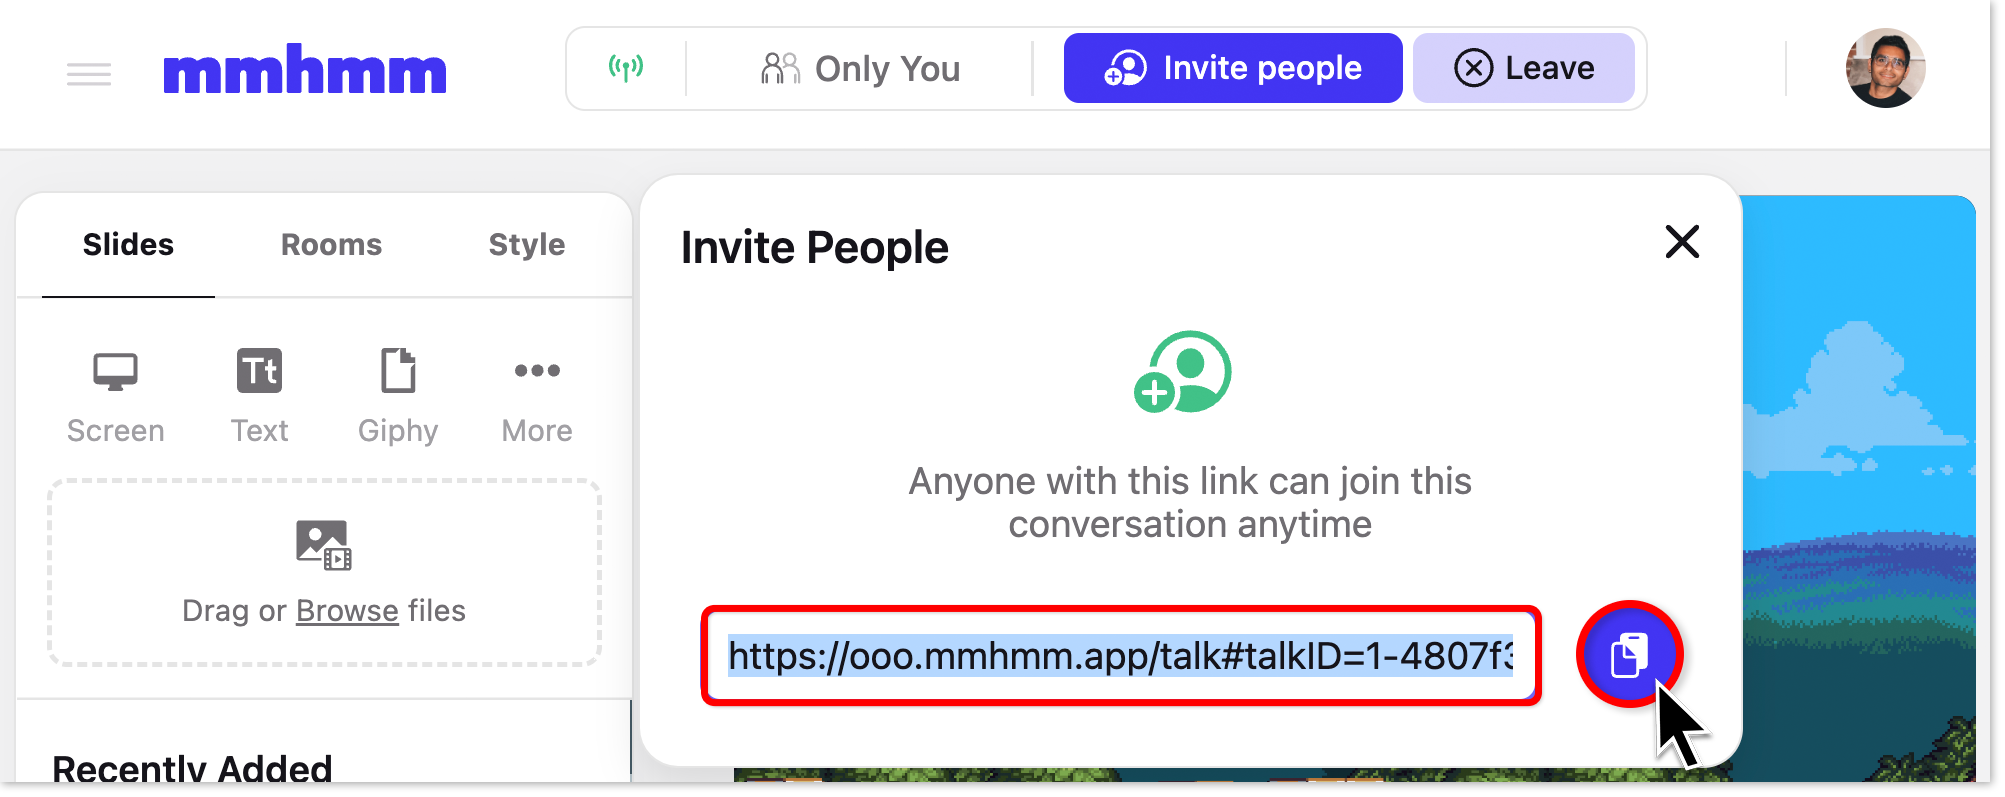 mmhmm invite people_.png